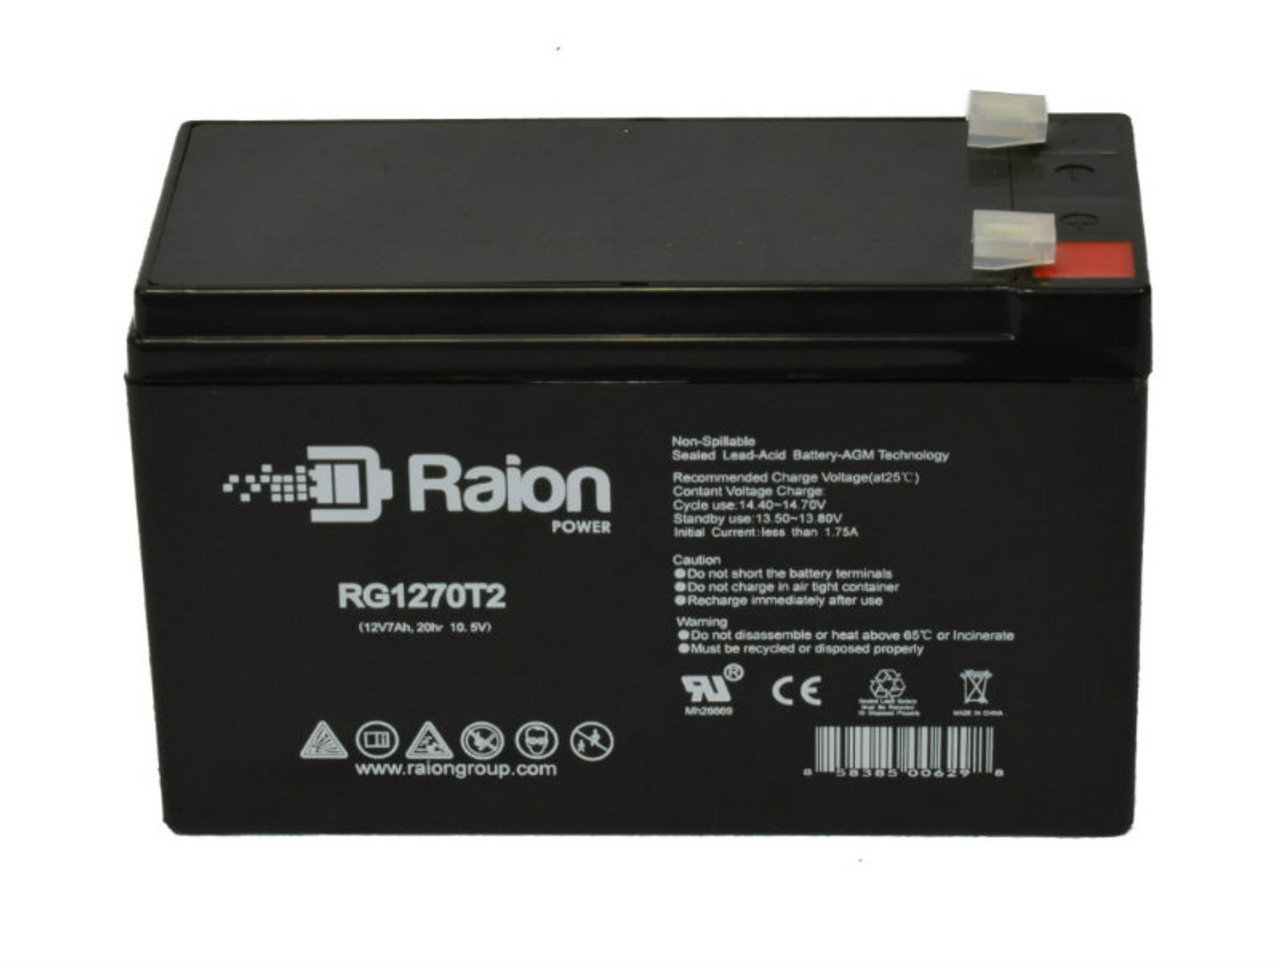 Raion Power RG1270T1 12V 7Ah Lead Acid Battery for Bruno Elite Curved Stairlift CRE 2110